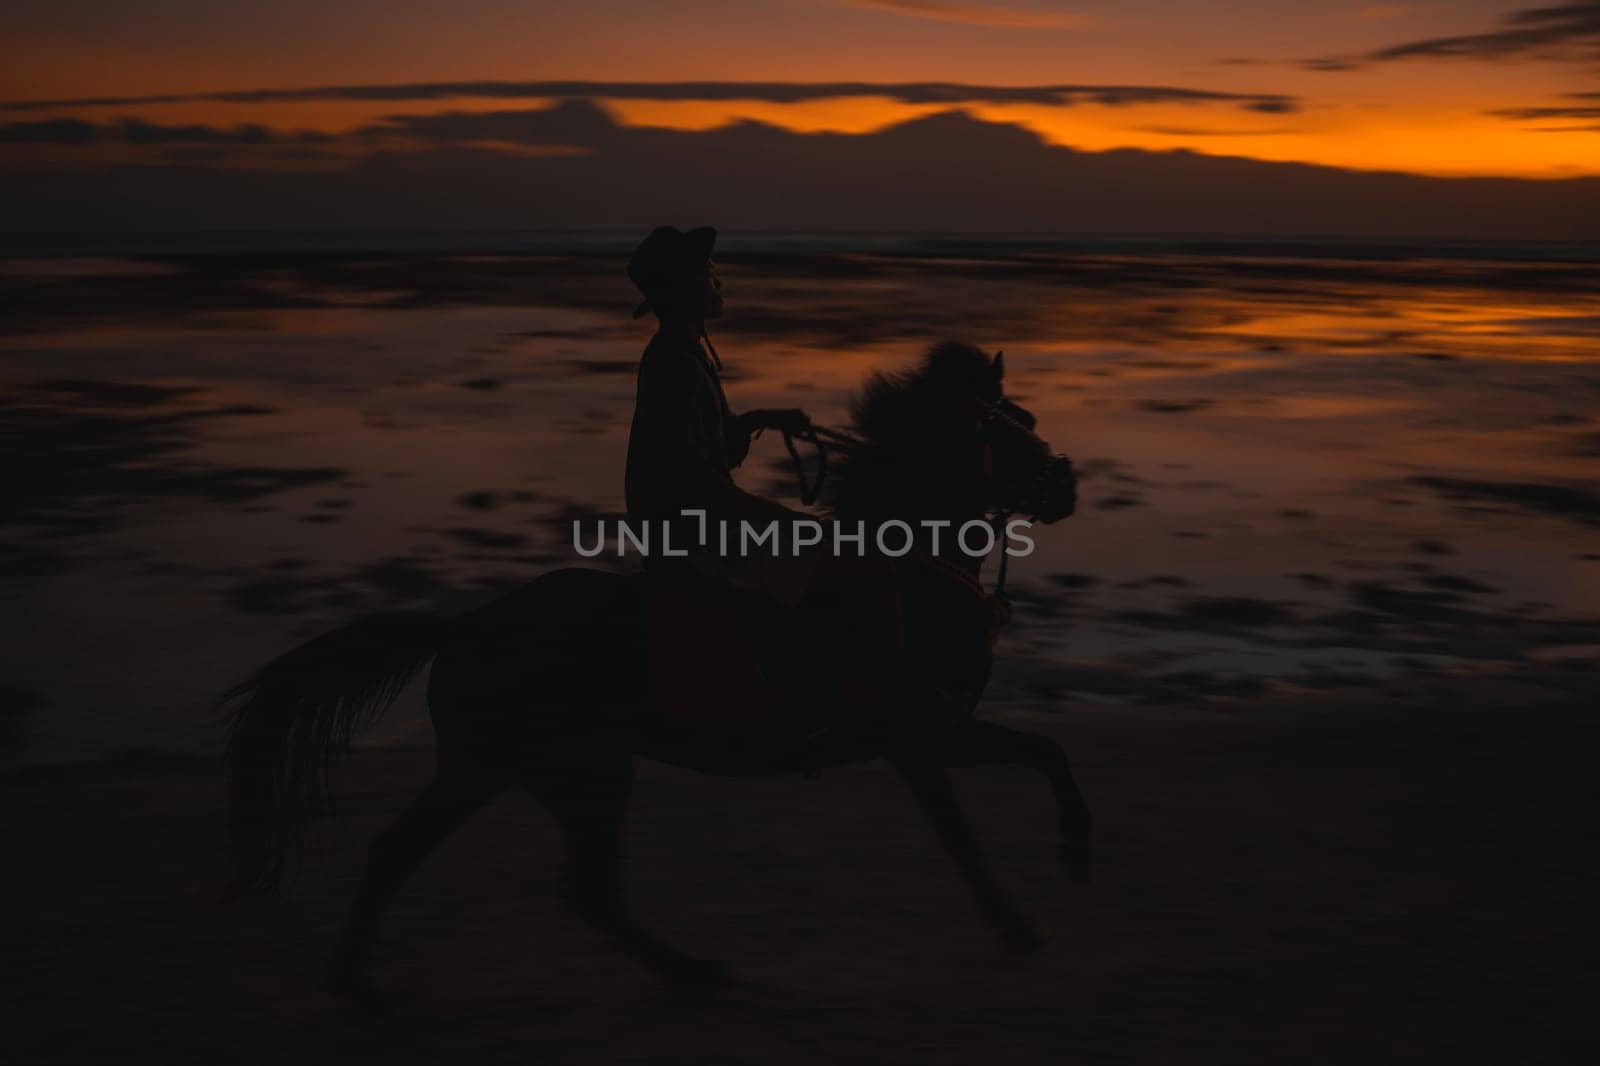 Horse unrecognized rider on the beach during sunset, captured in silhouette against a vibrant sky. The scene reflects on the wet sand, creating a picturesque, serene moment by the ocean.